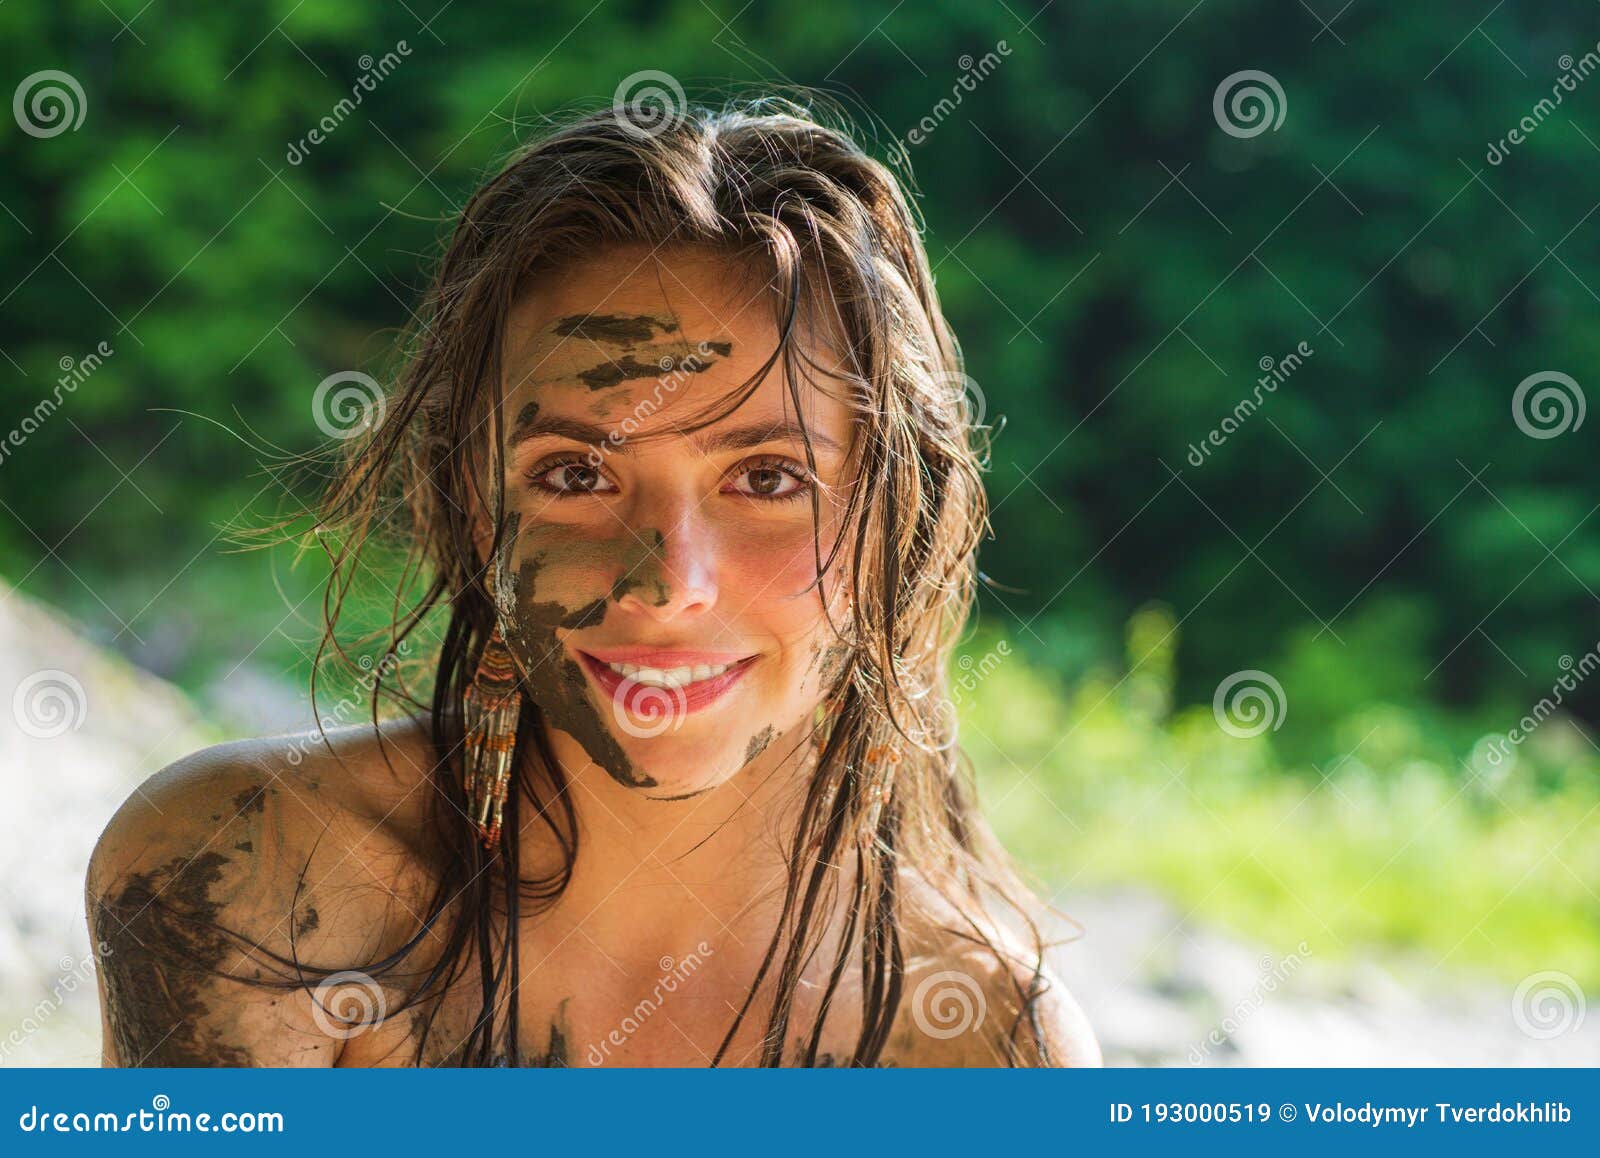 Dirty Naked Girl With Mud